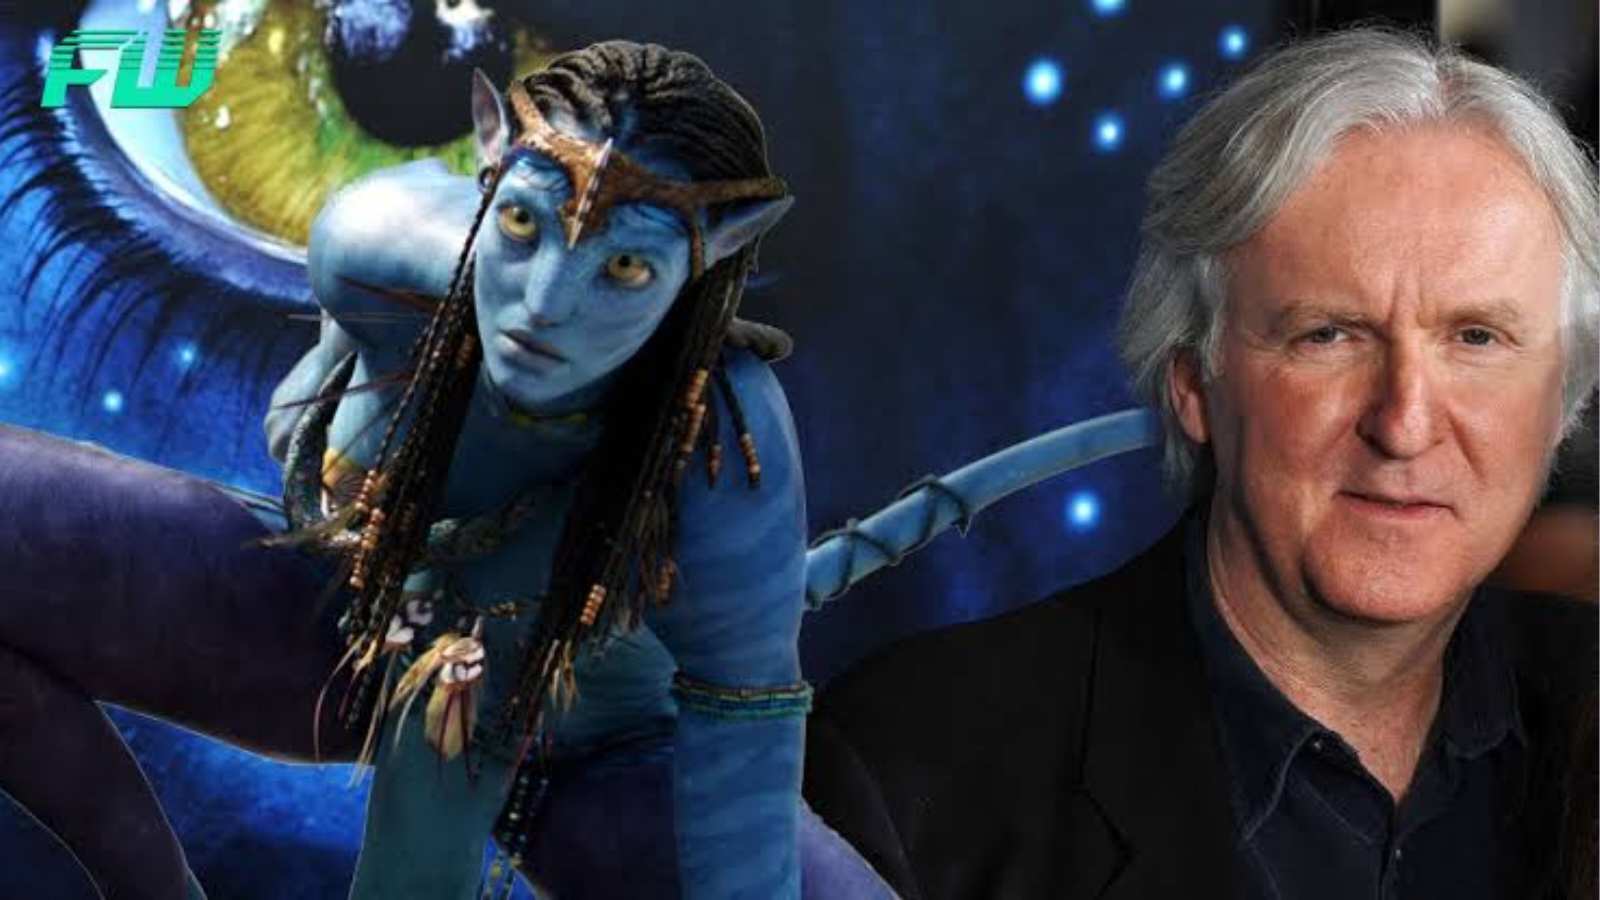 James Cameron, the director of the 'Avatar' franchise